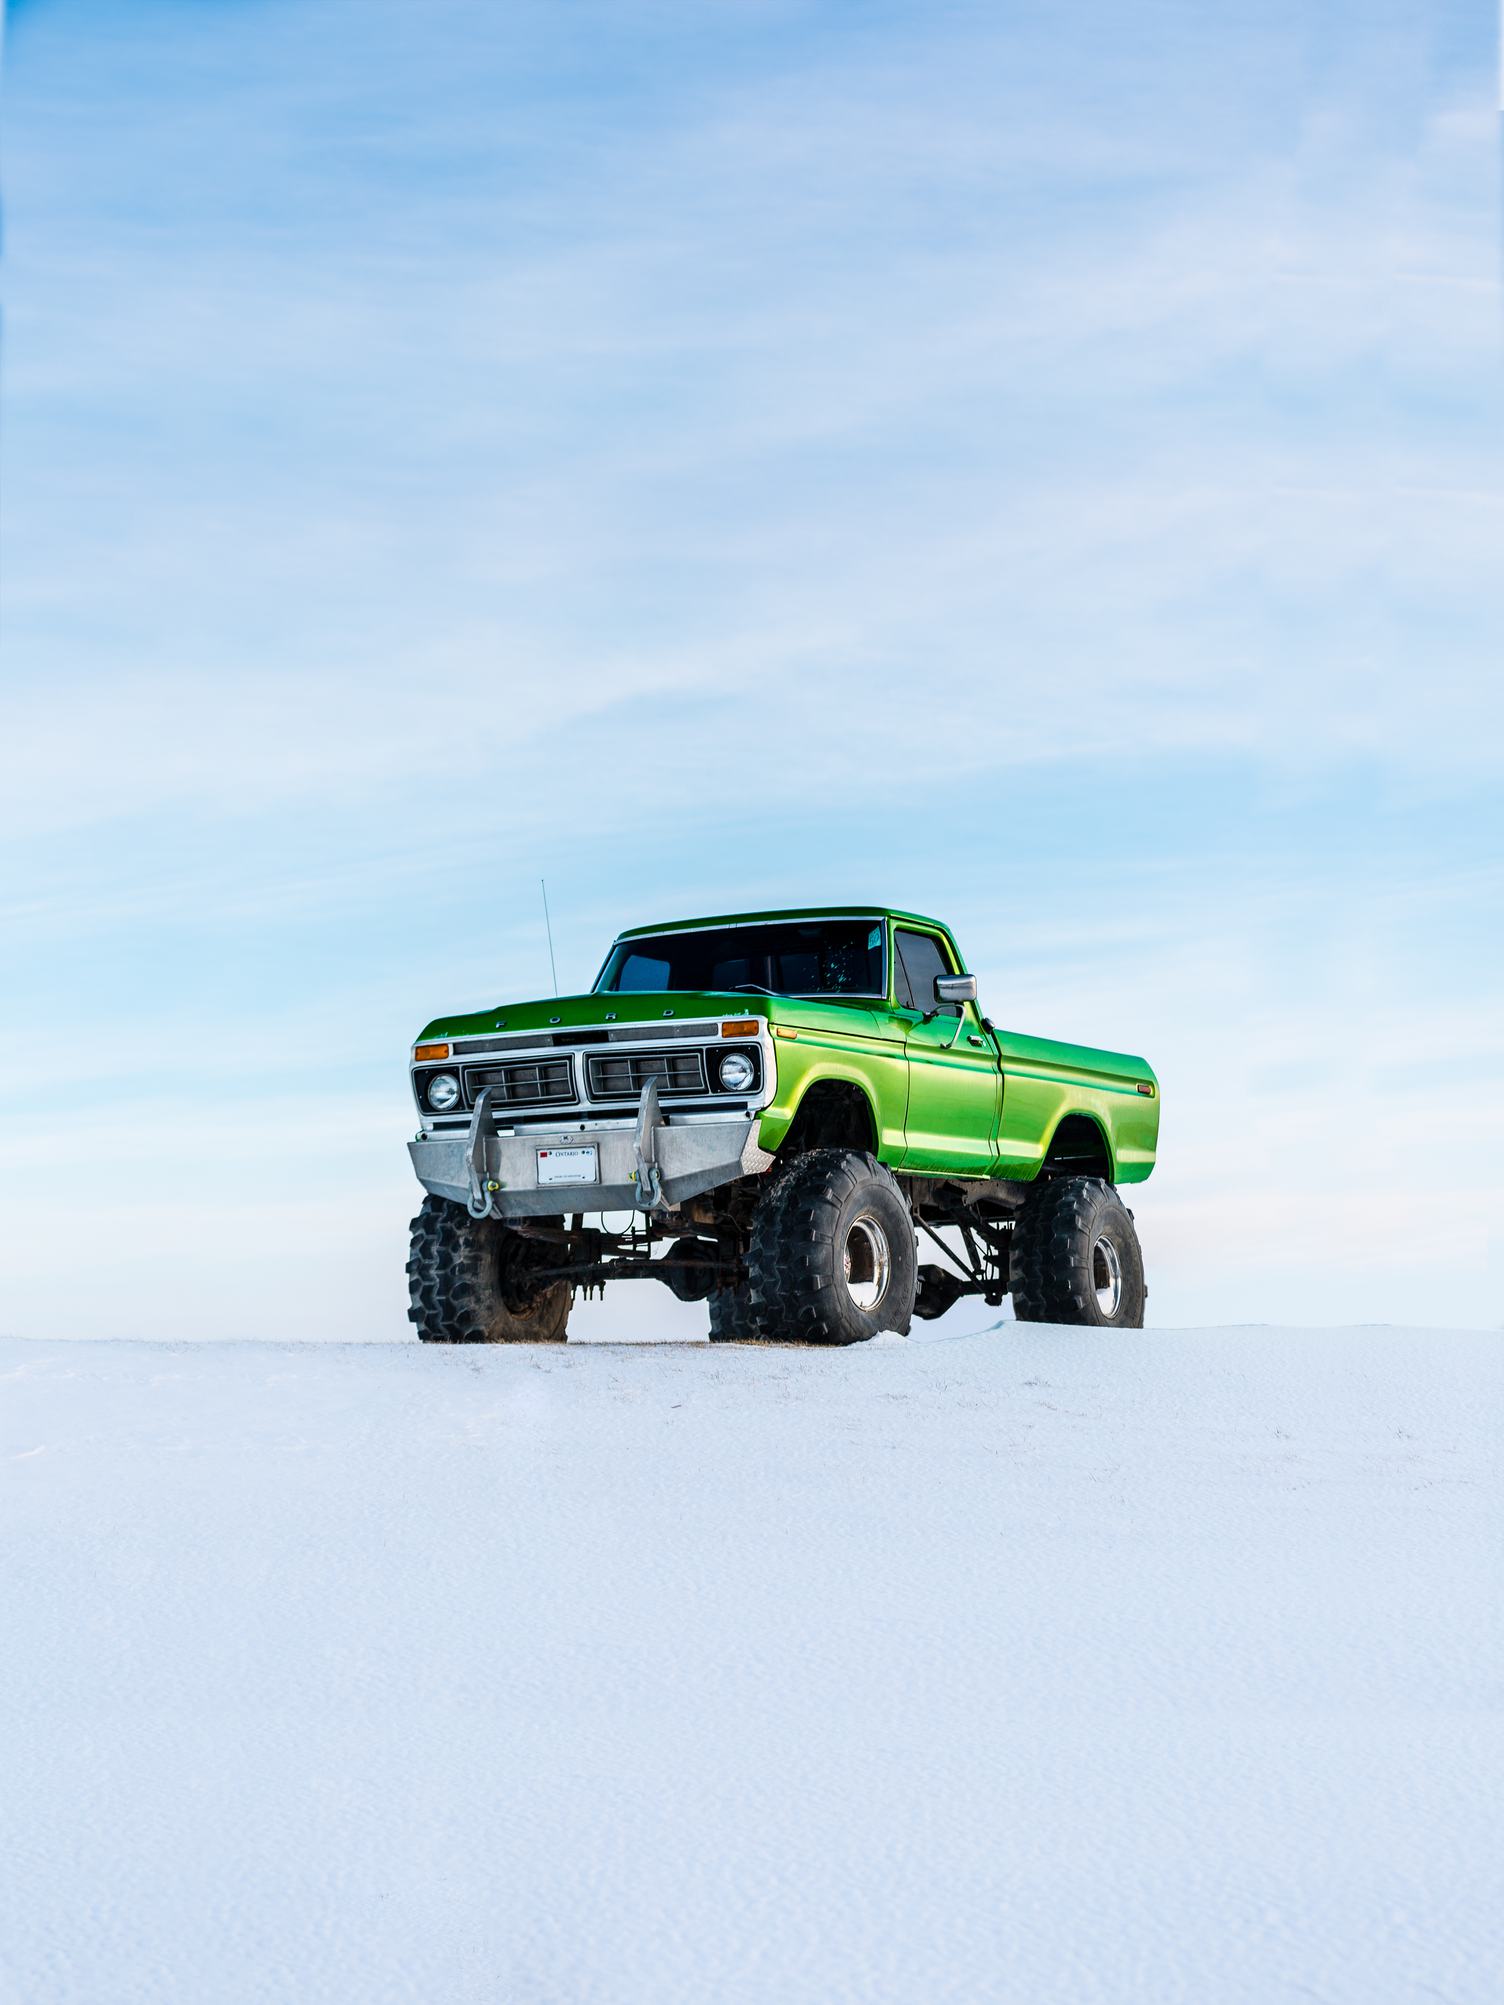 A Large Green Pickup Truck in the Snow